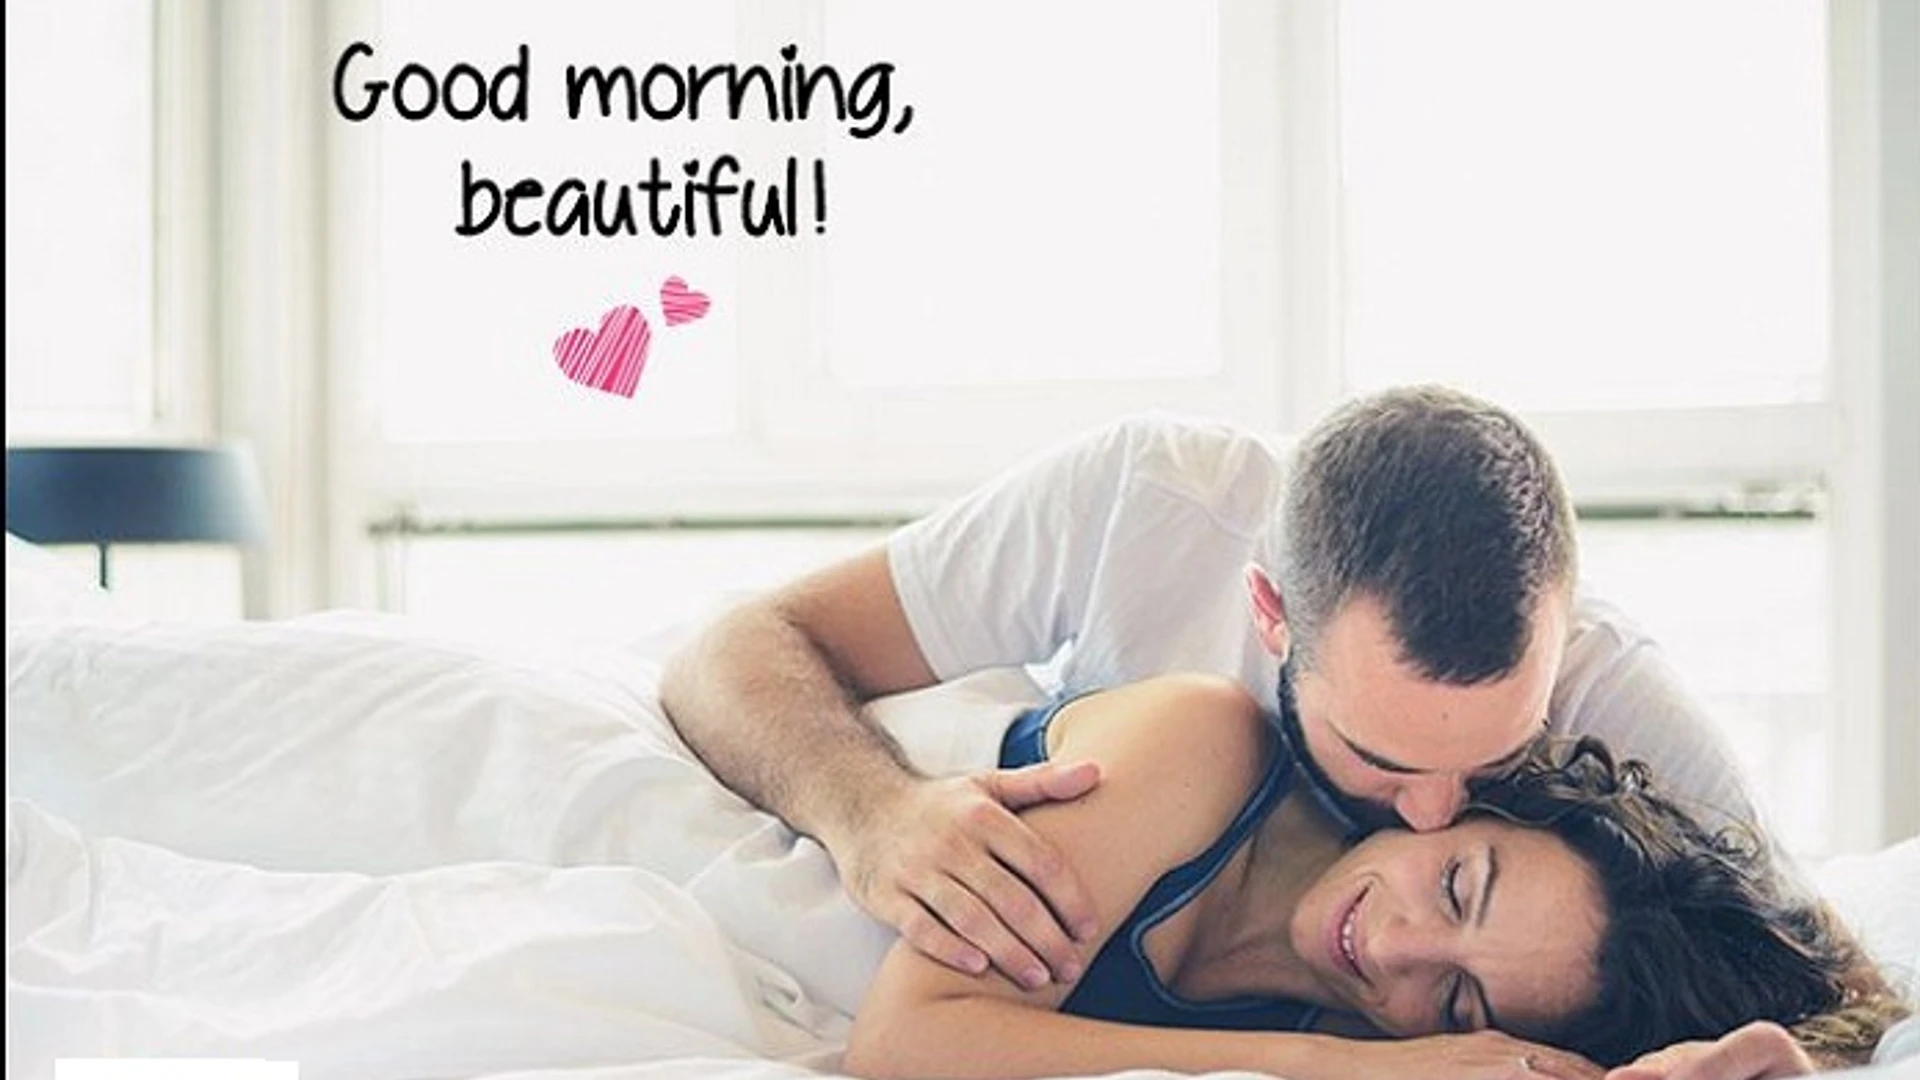 117 Adorable Good Morning Messages For Wife